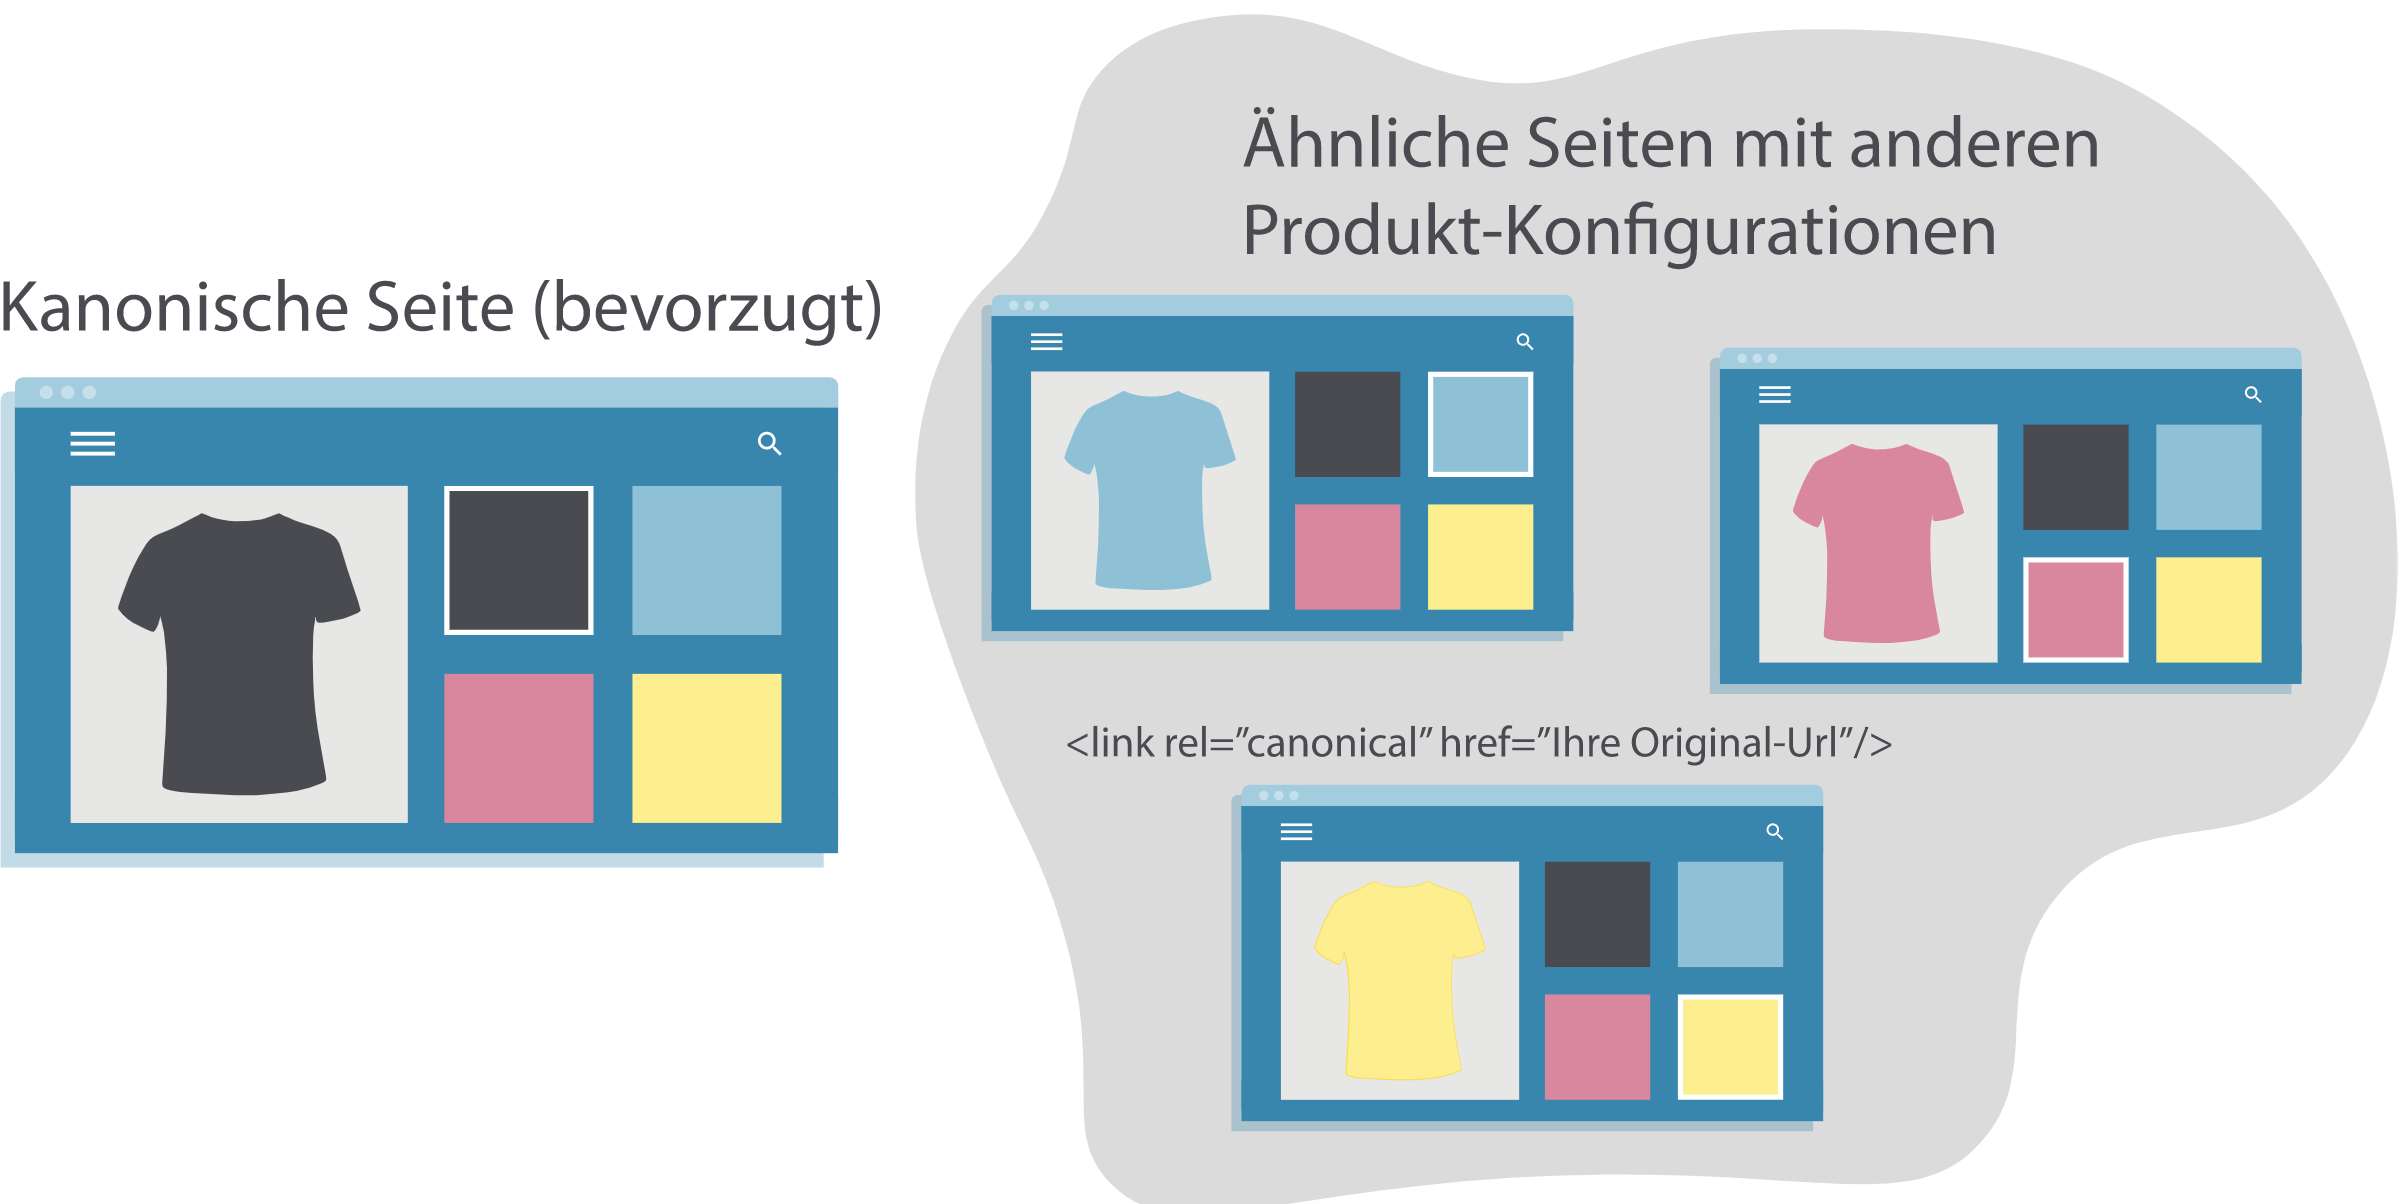 Canonical Tag Funktion im E-Commerce